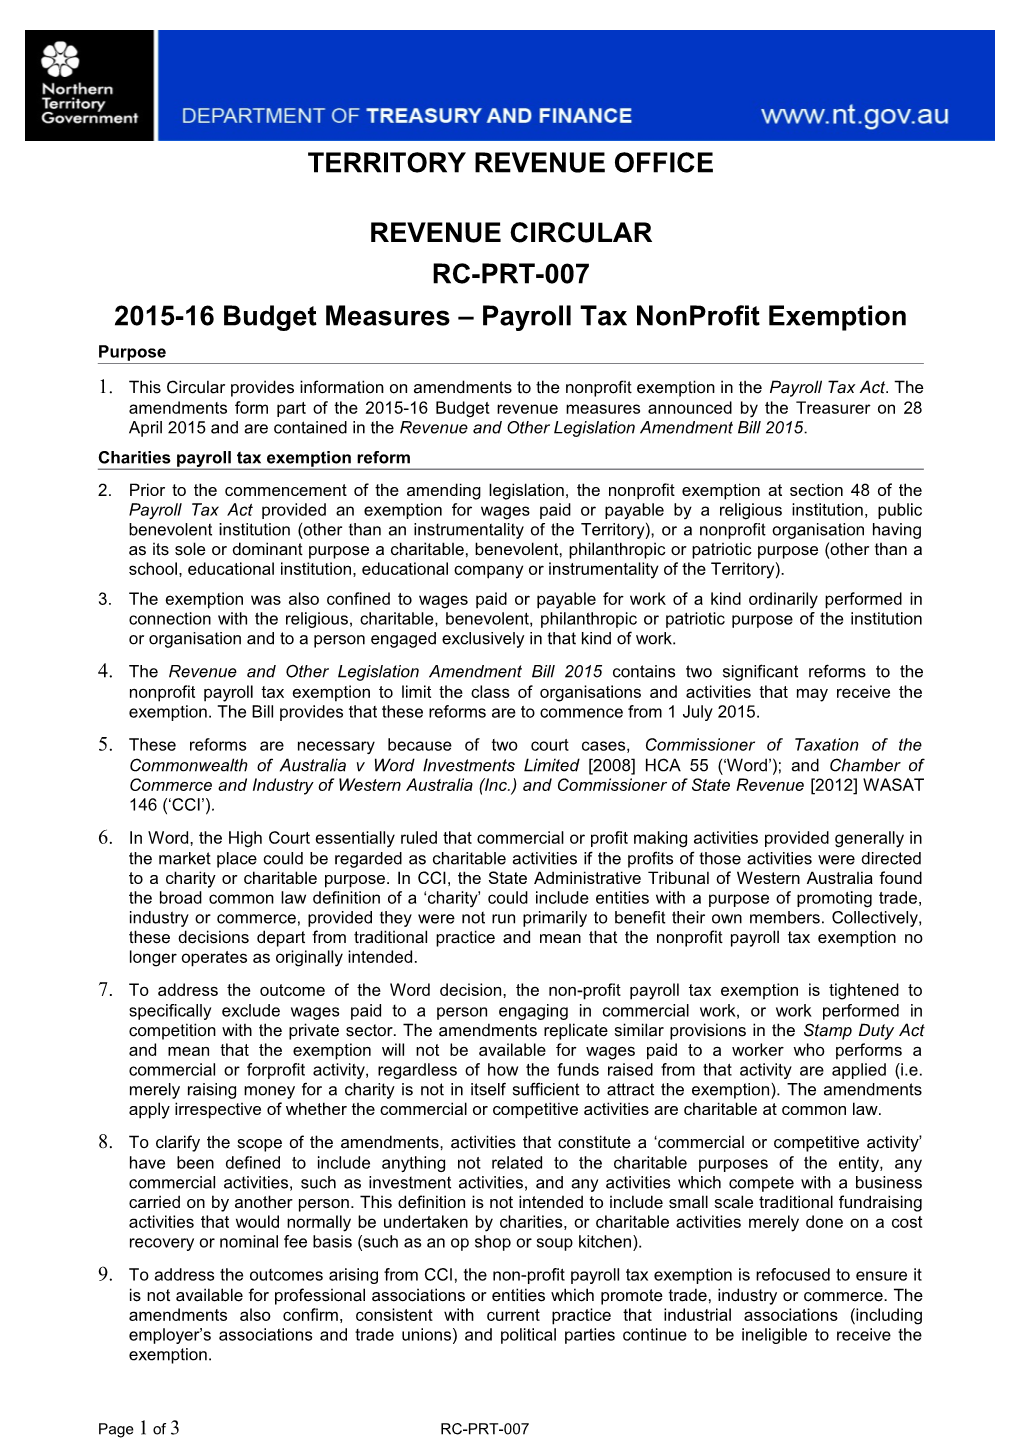 2015-16 Budget Measures Payroll Tax Non-Profit Exemption